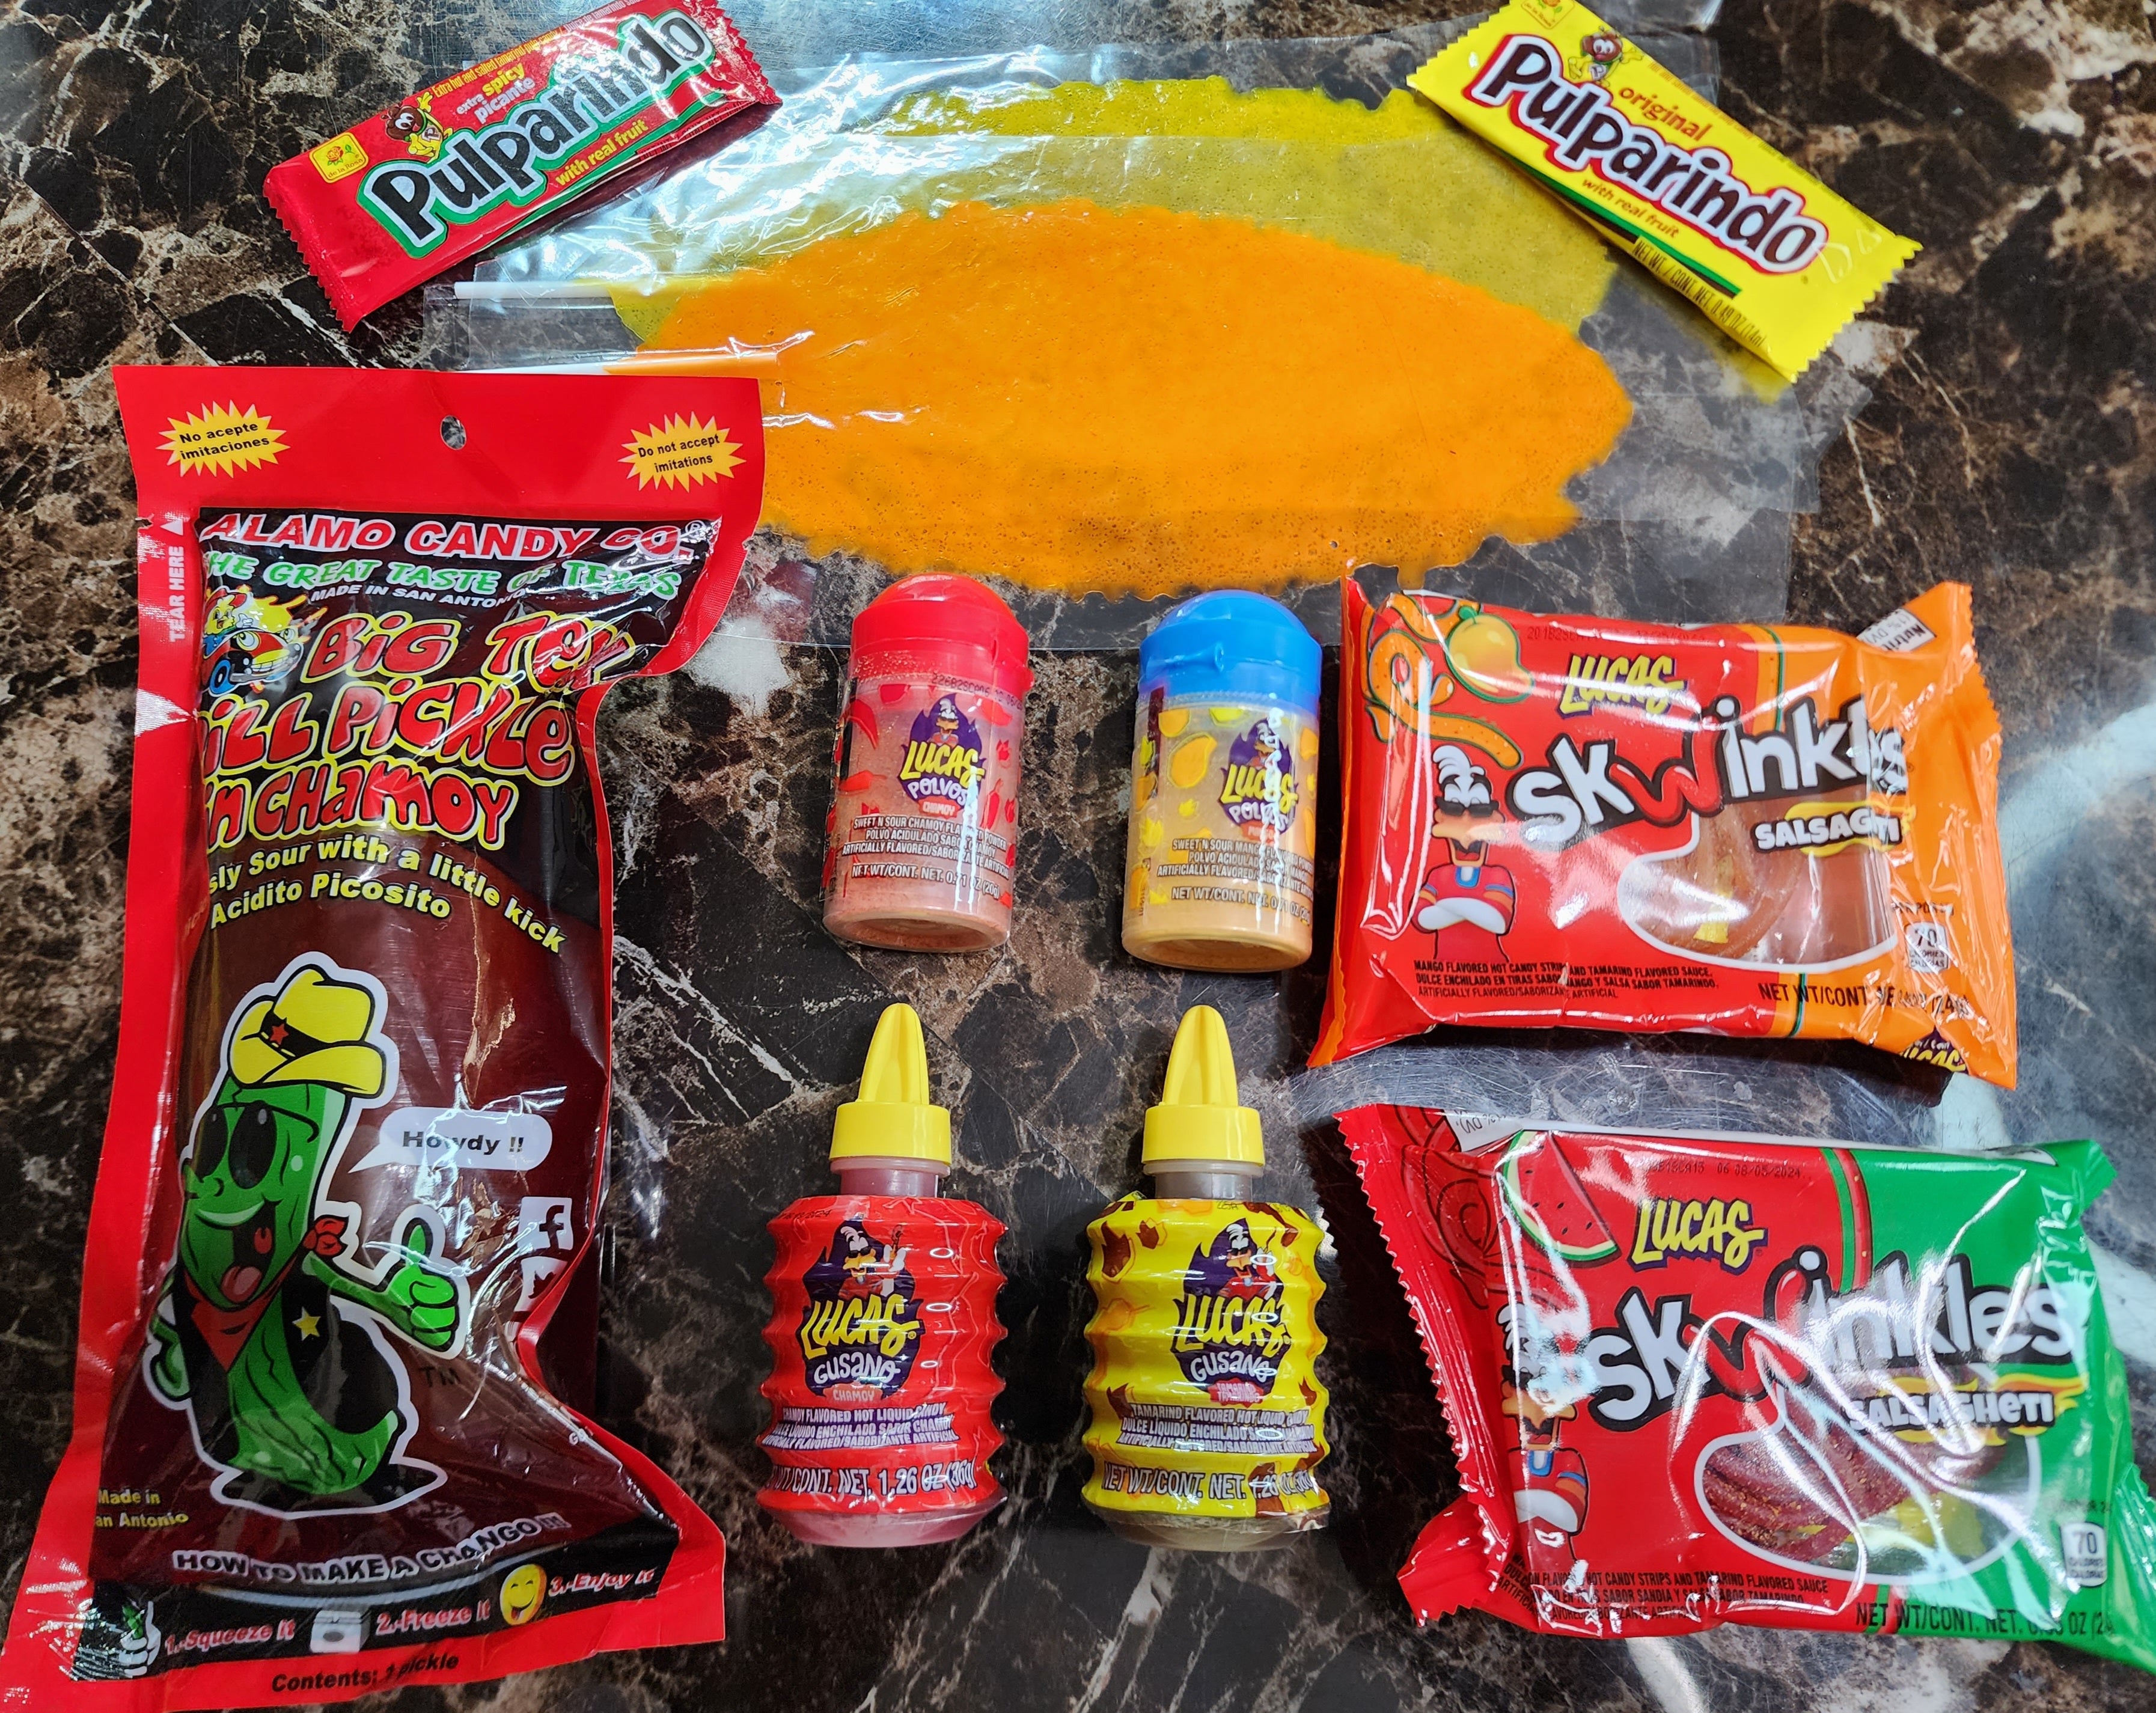 Fountain City Fulfillment Chamoy Pickle Kit - Deluxe Chamoy Pickle Set with  Ricos & Warhead Pickle, Lucas Swinkles Salsaghetti Mexican Candy Strings